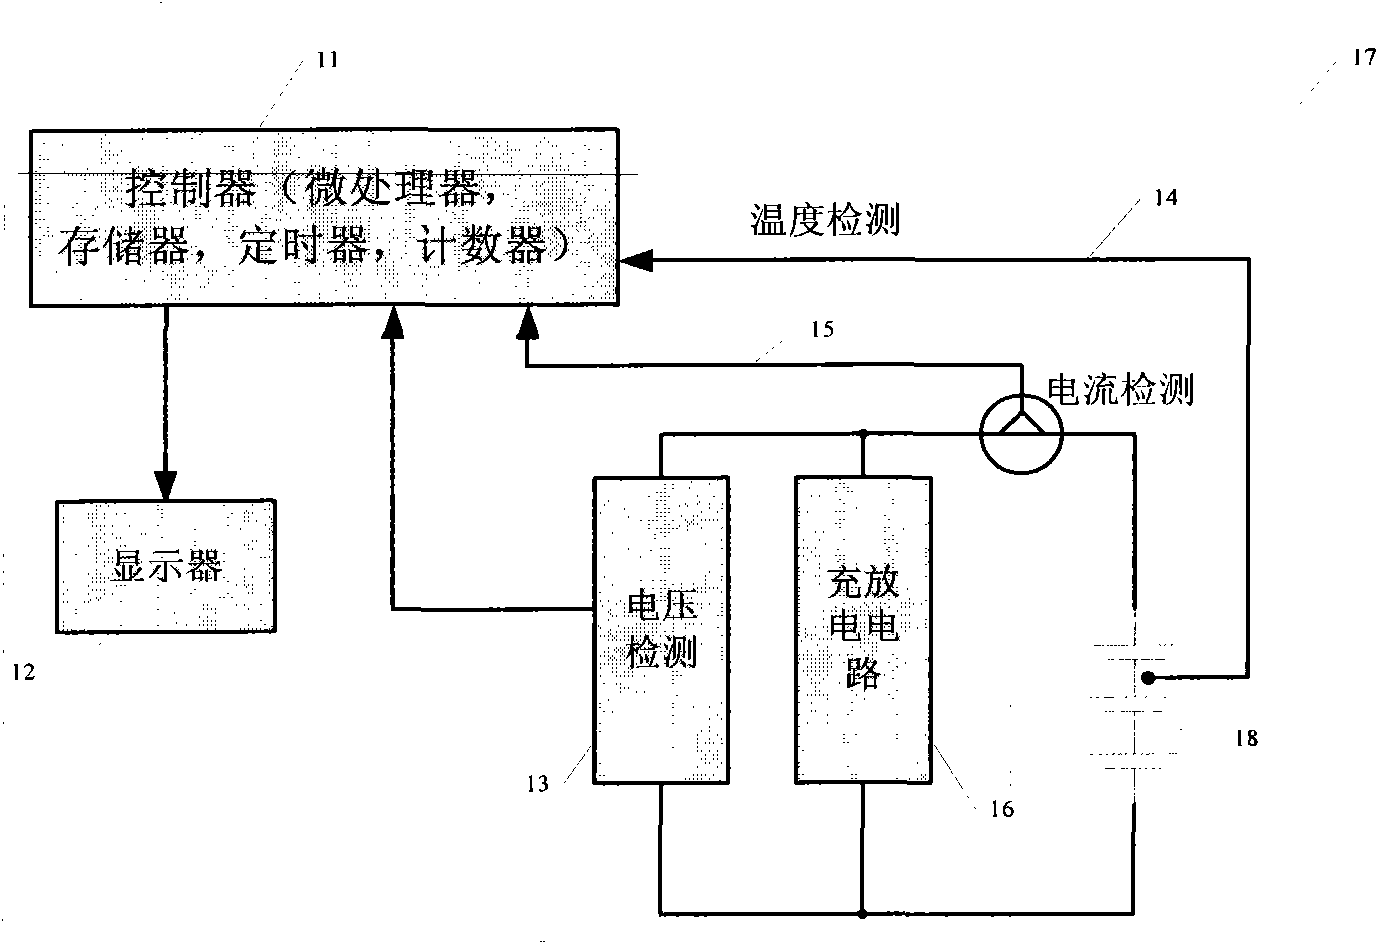 Electric quantity correction and control method of lithium ion power storage battery